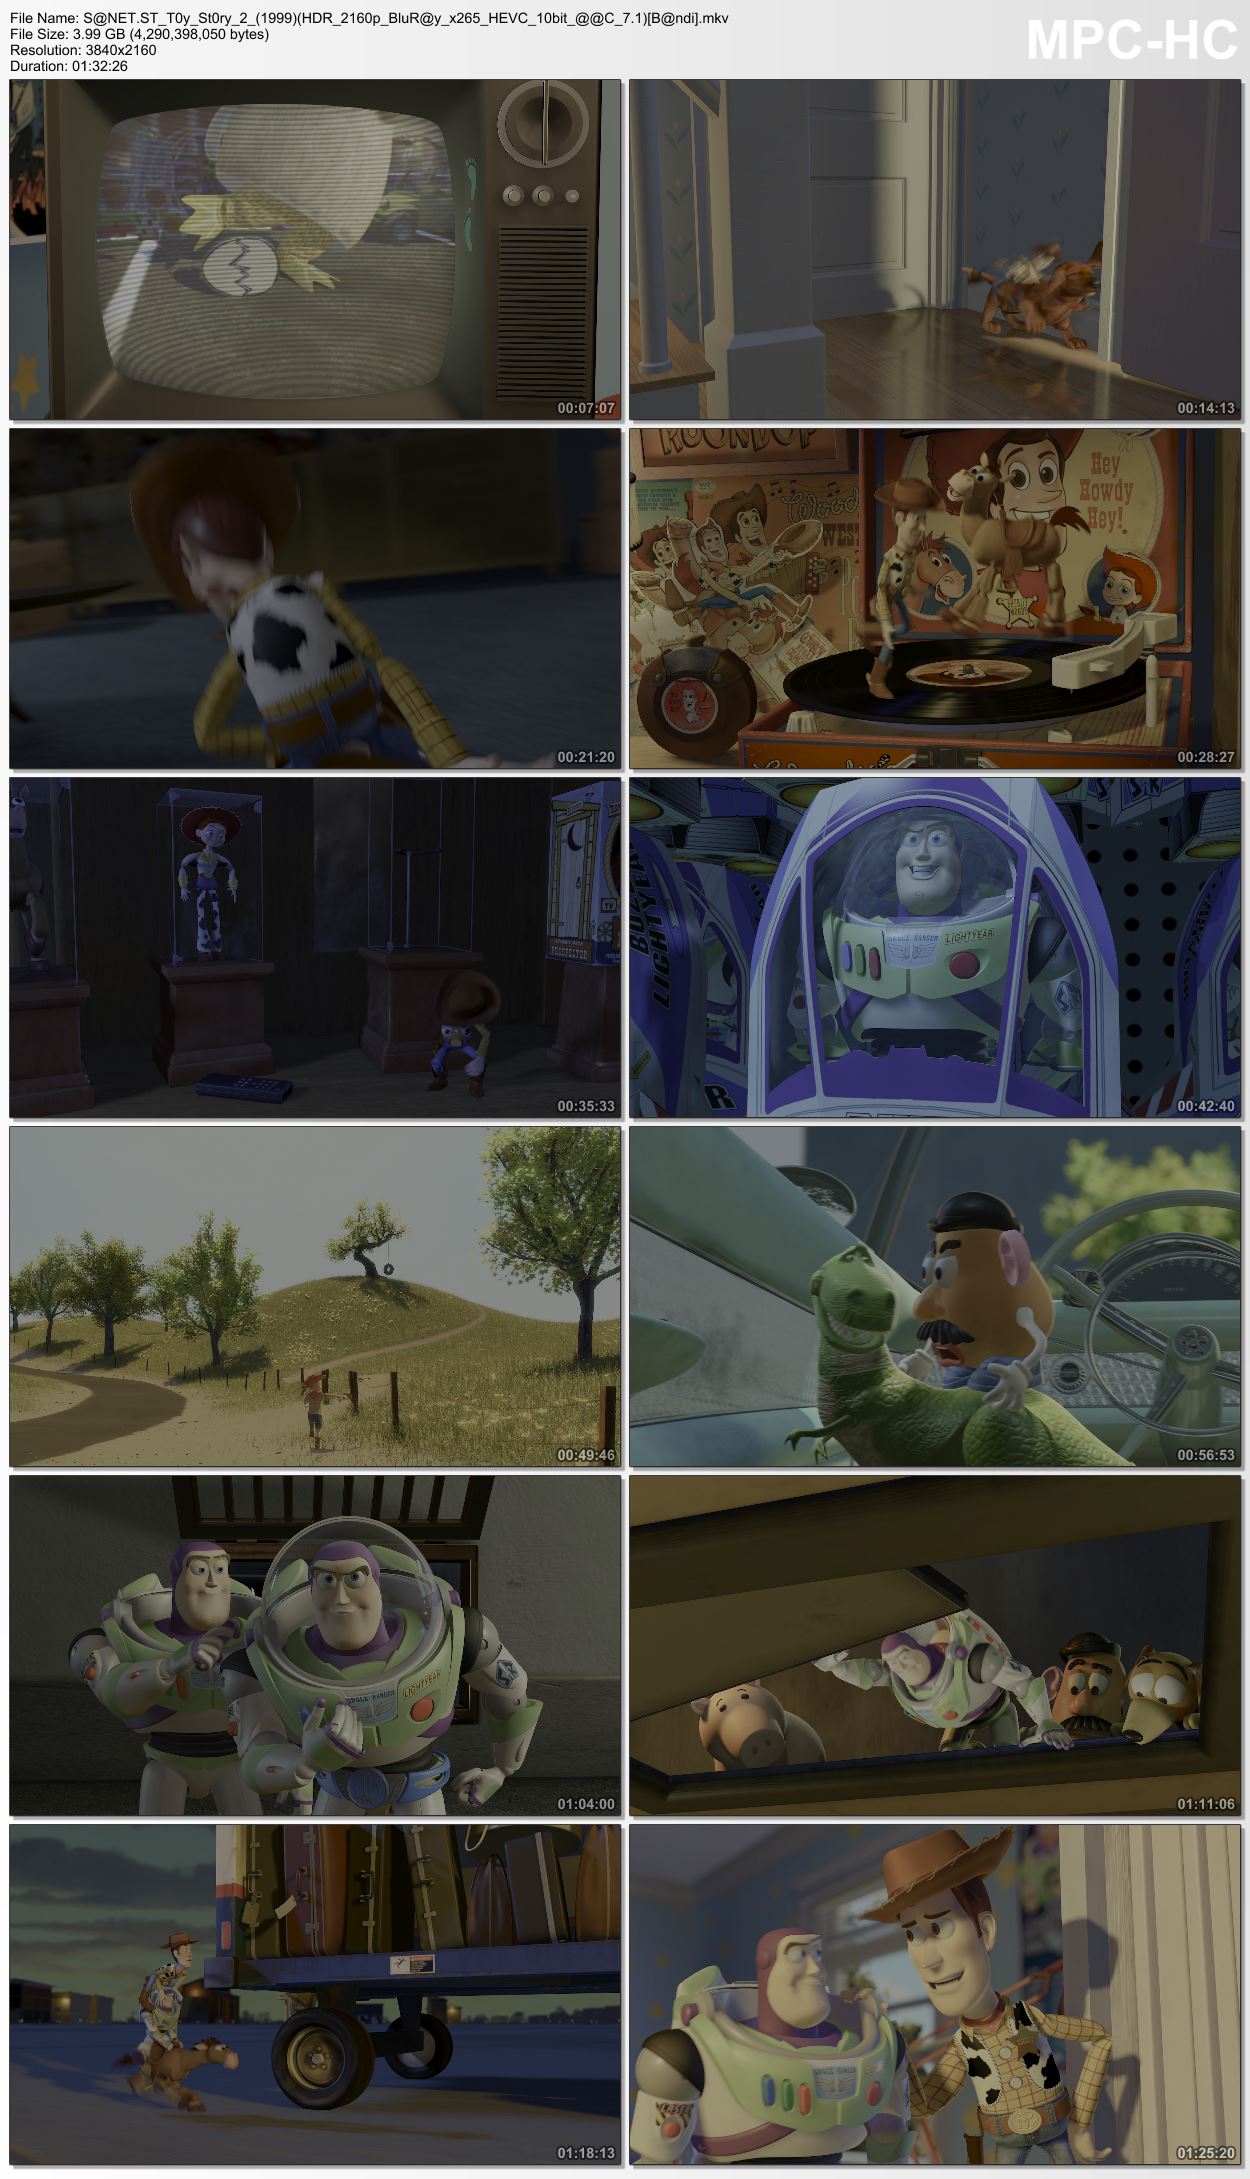 download toy story 2 1999